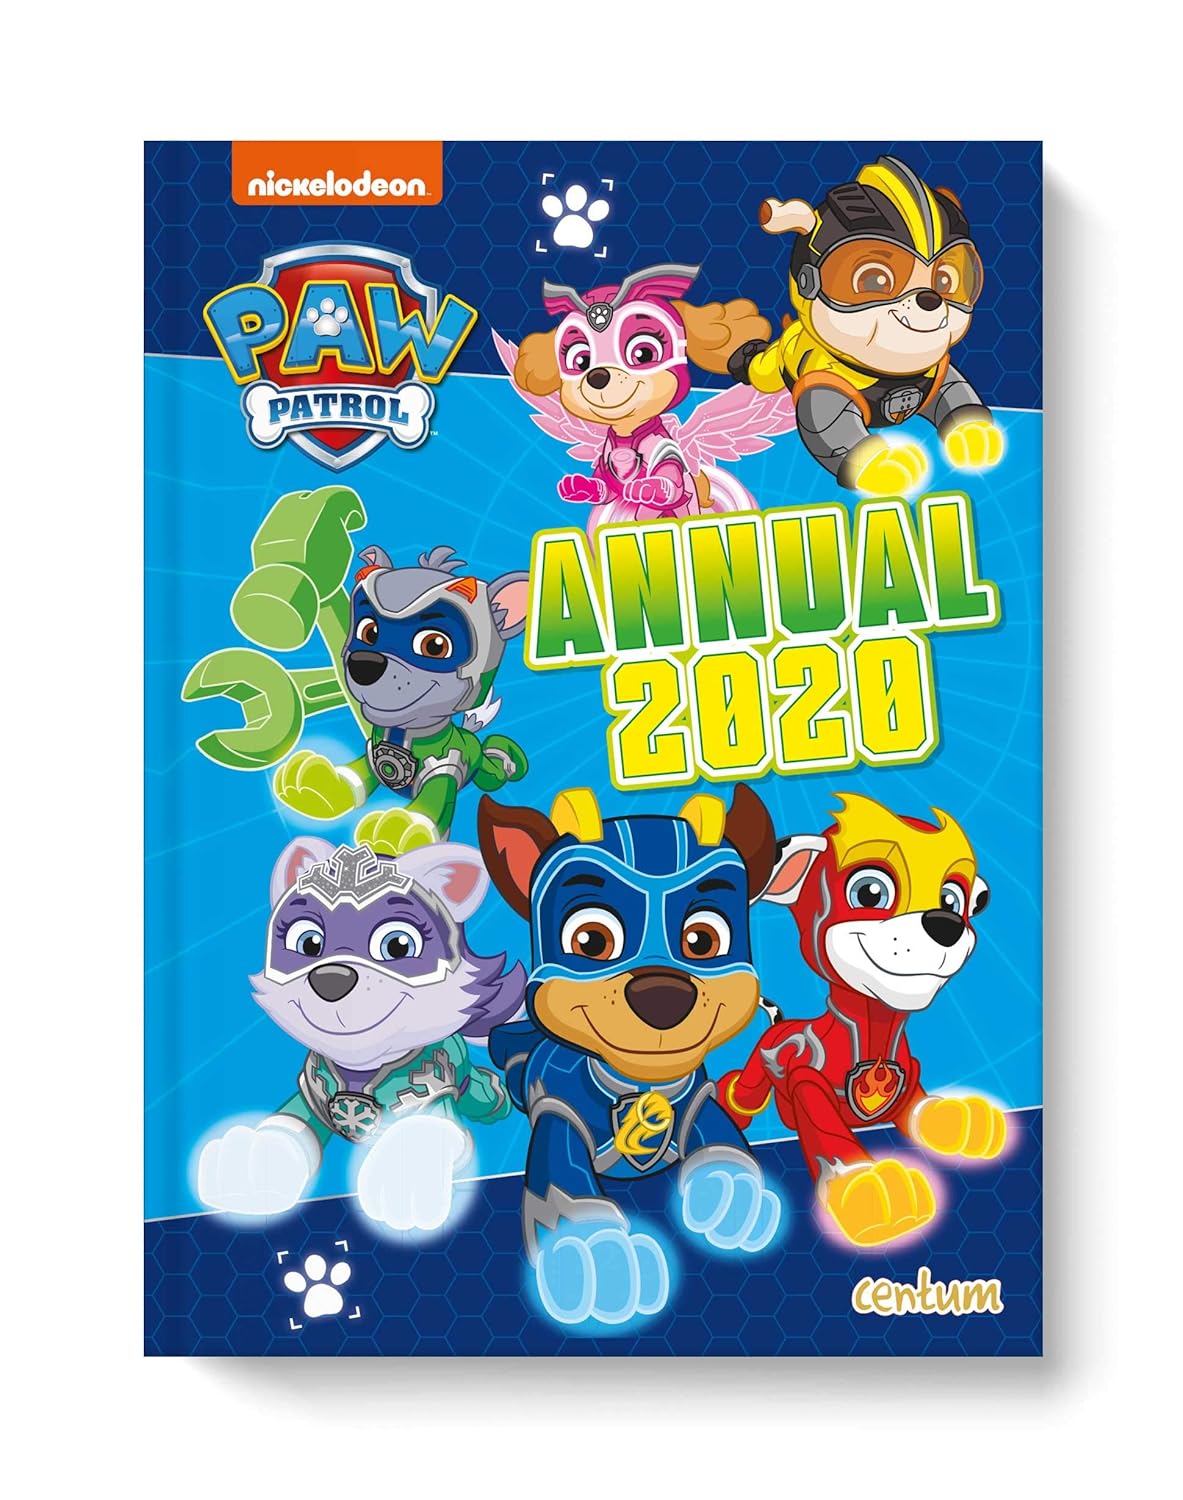 Paw Patrol Annual 2020 by Centum Books Ltd Book Children's Picture Nickelodeon